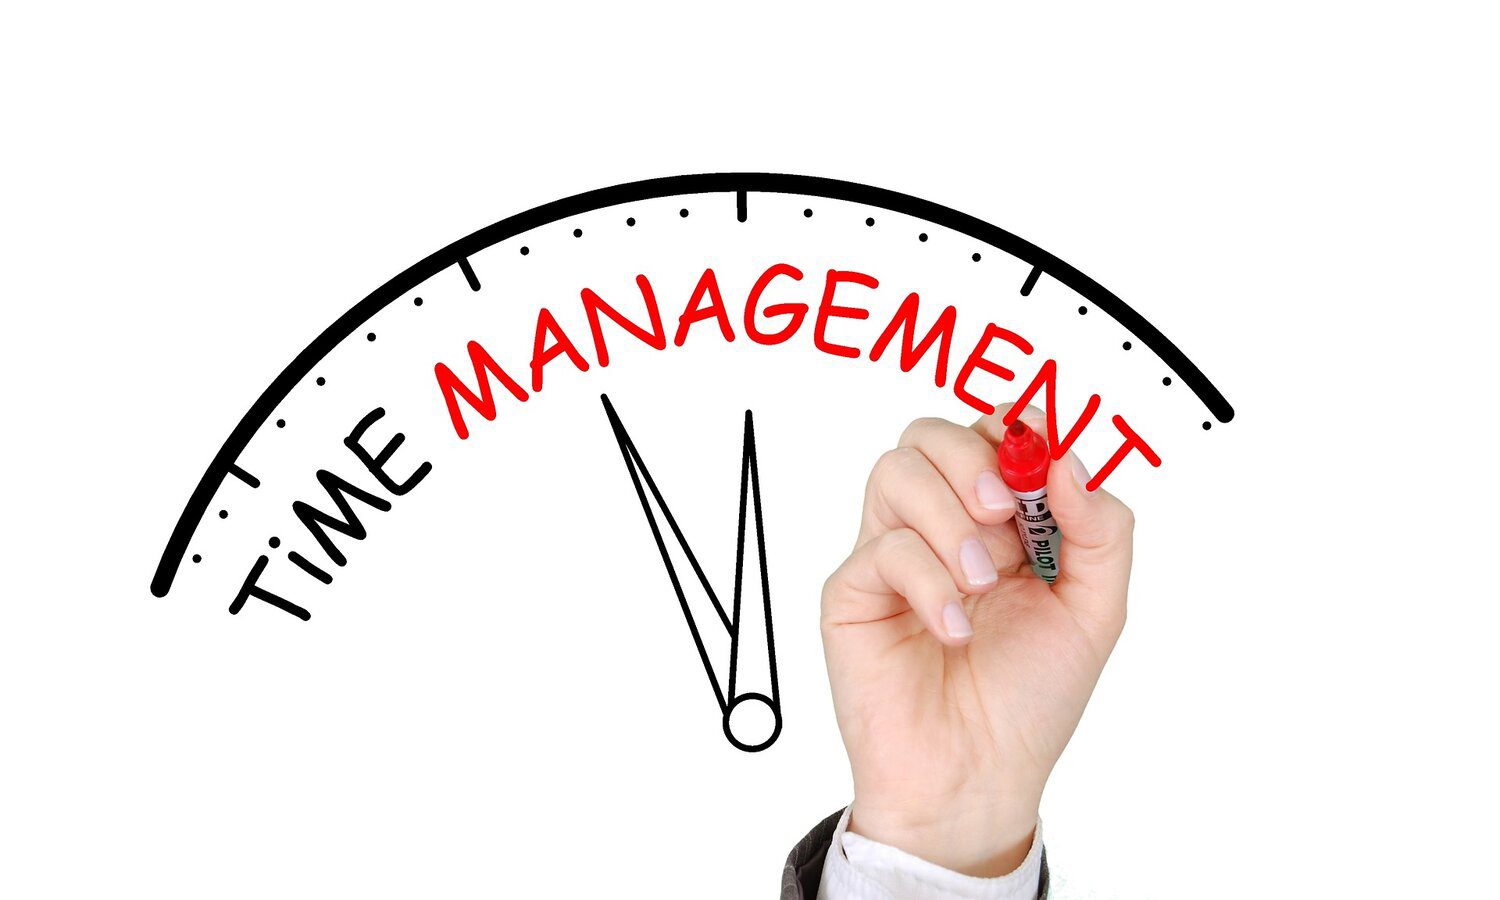 Time Management and Planning for Scholarship Applications